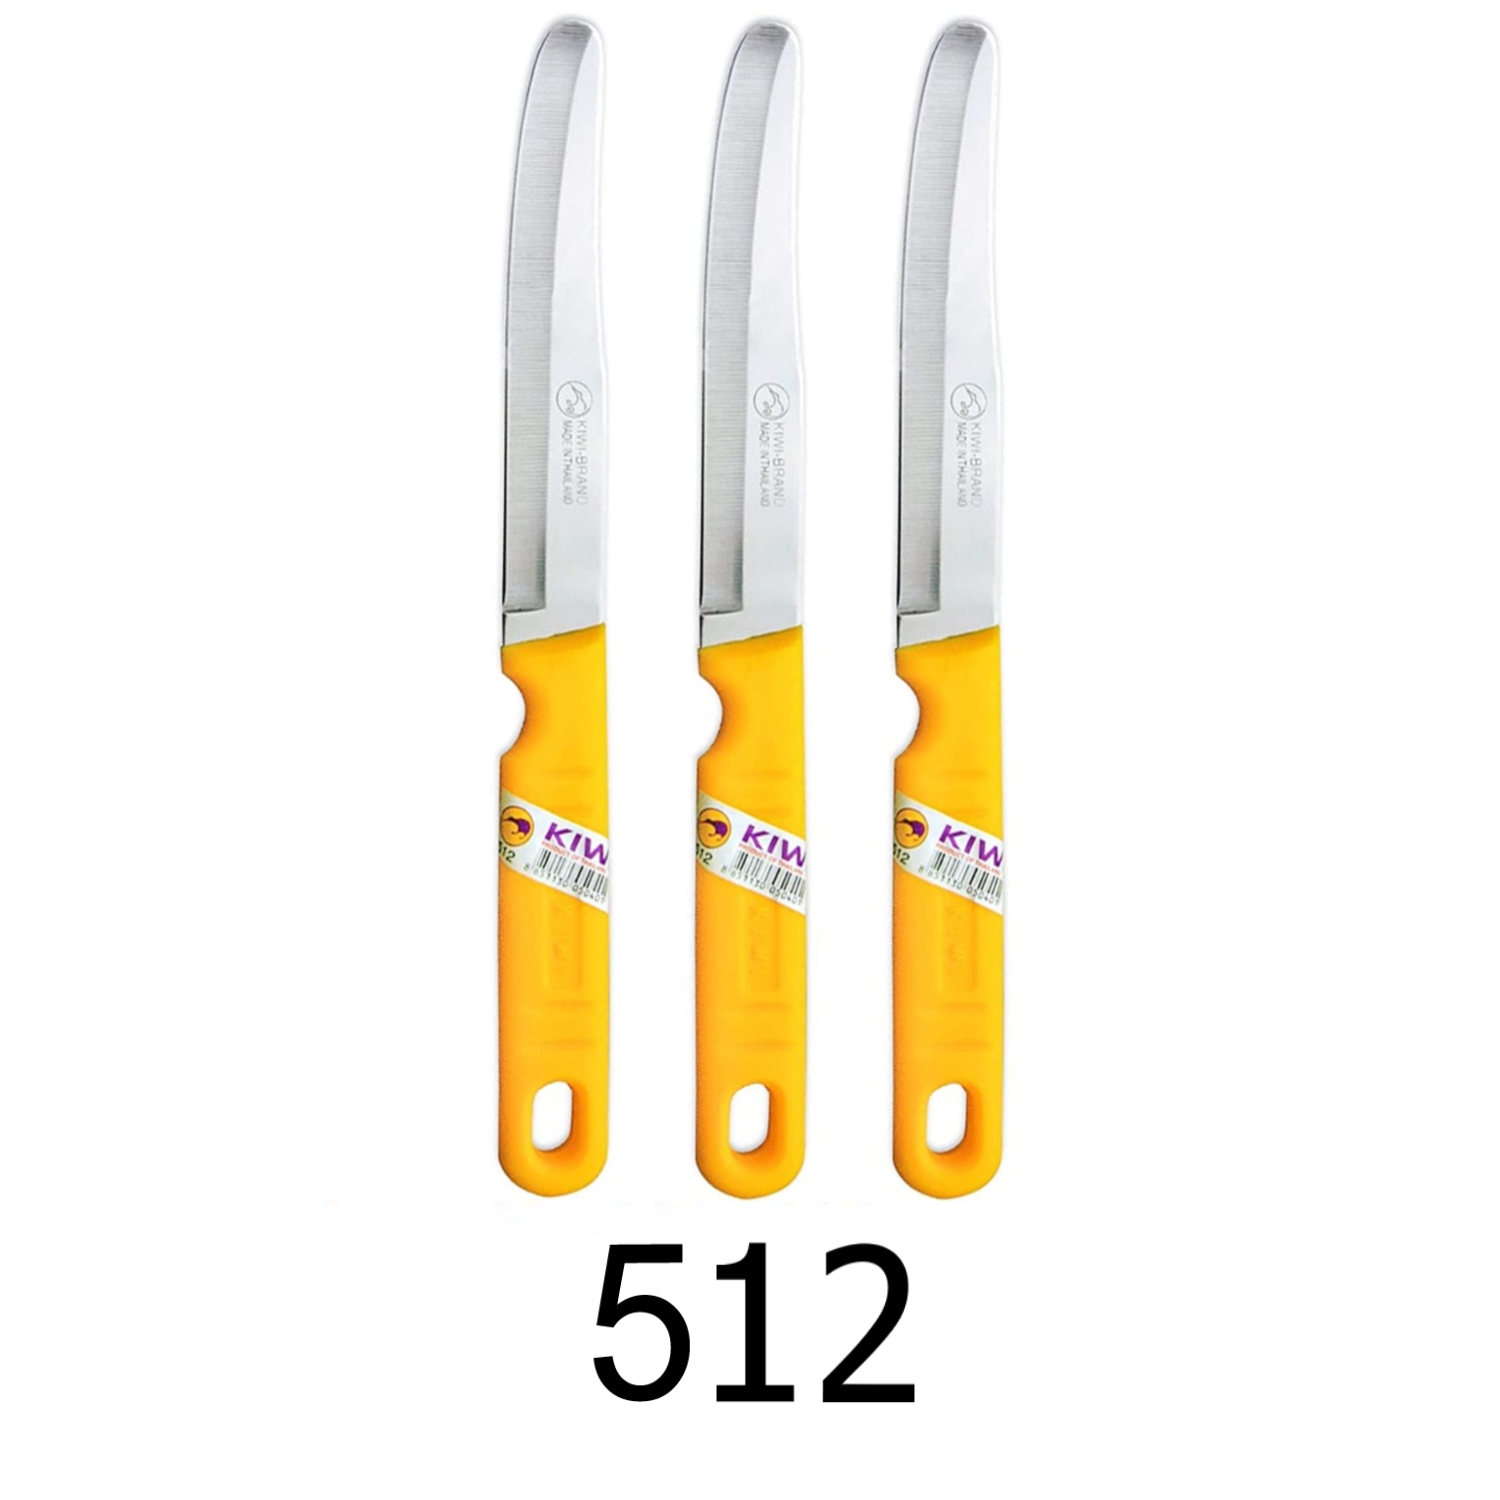 6 Pcs Kiwi Knife Chef Stainless Steel Blade Plastic Handle Cutting